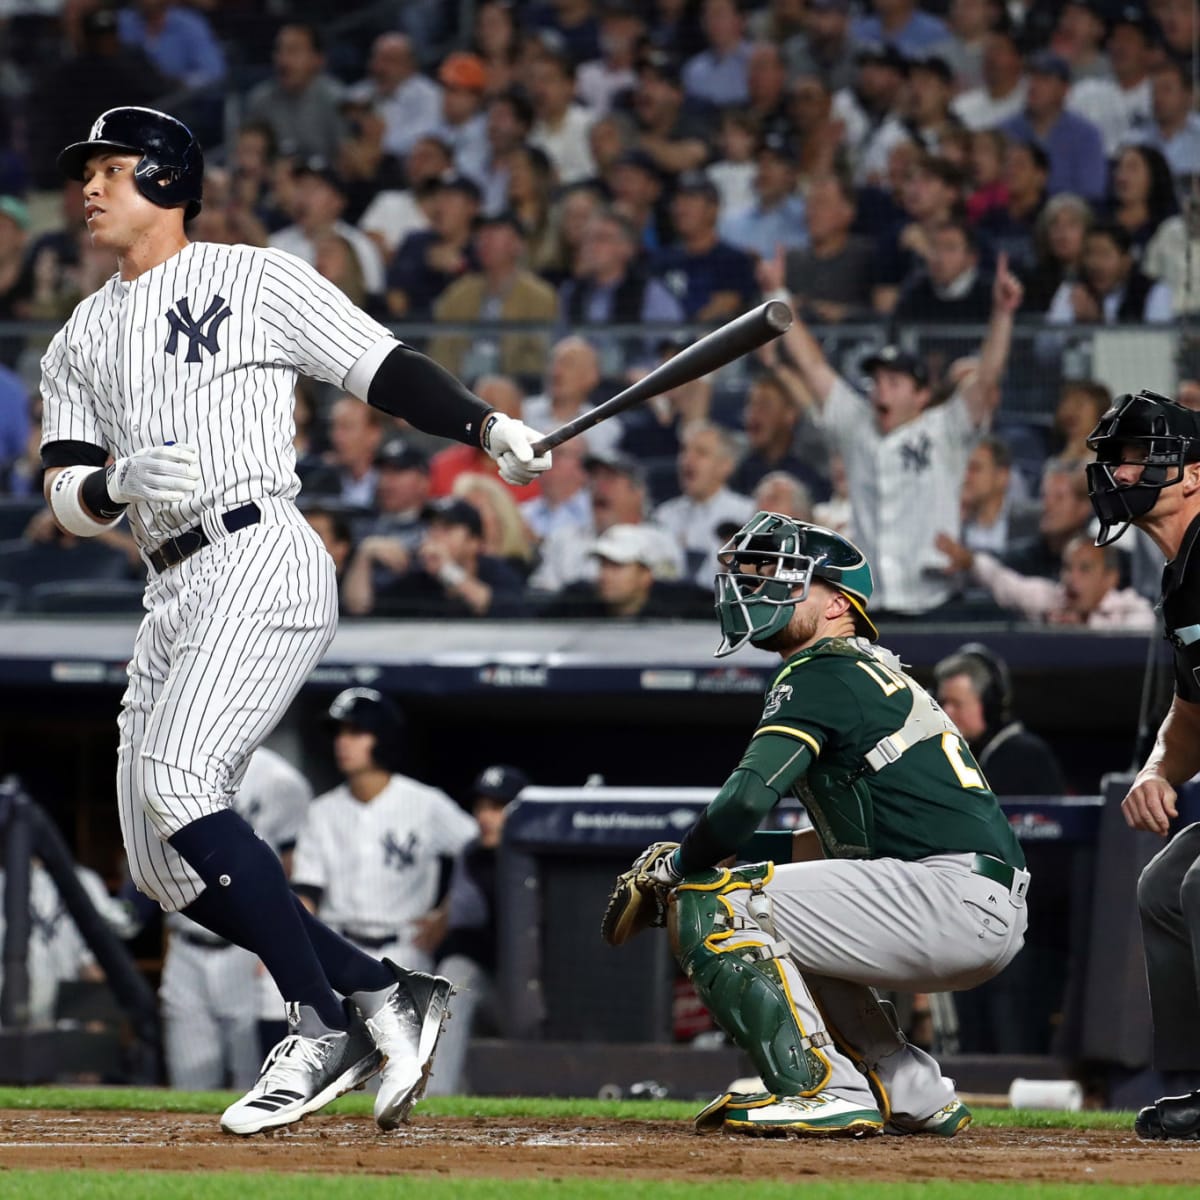 Aaron Judge homer leads to fans' wholesome moment